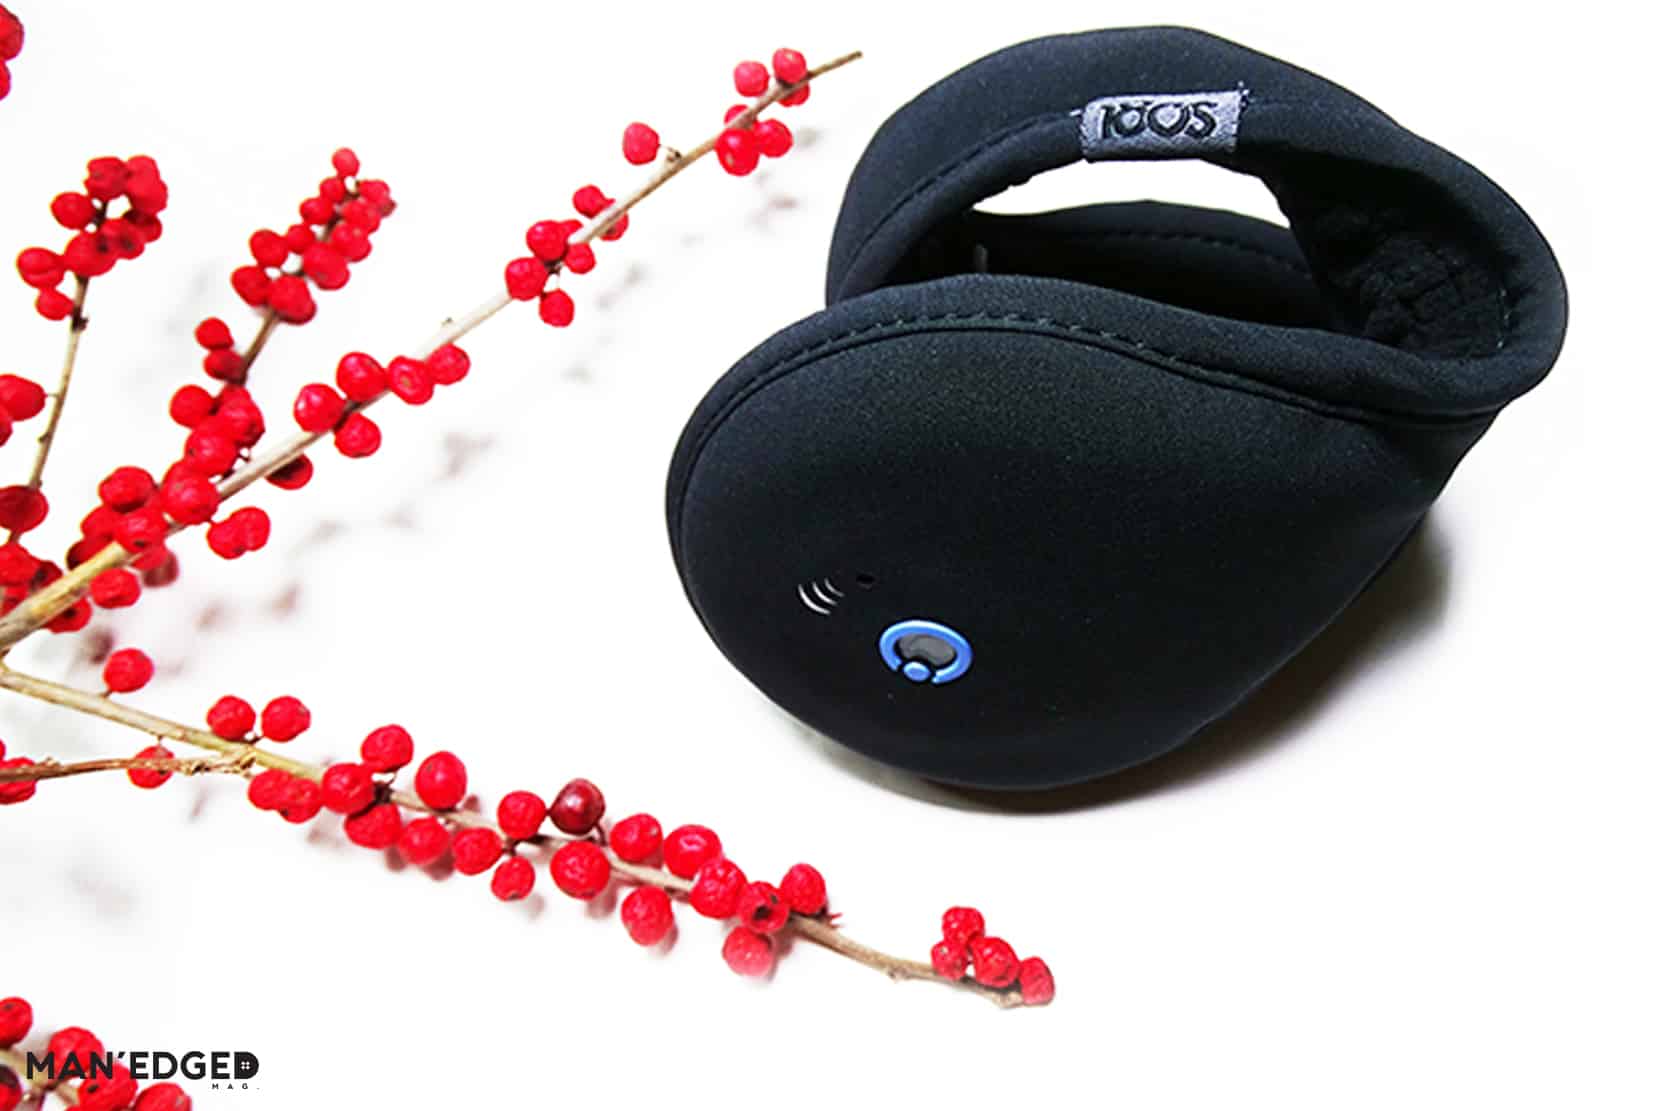 180s Bluetooth Ear Warmers in MAN'edged Magazine's best gift ideas for the tech guy